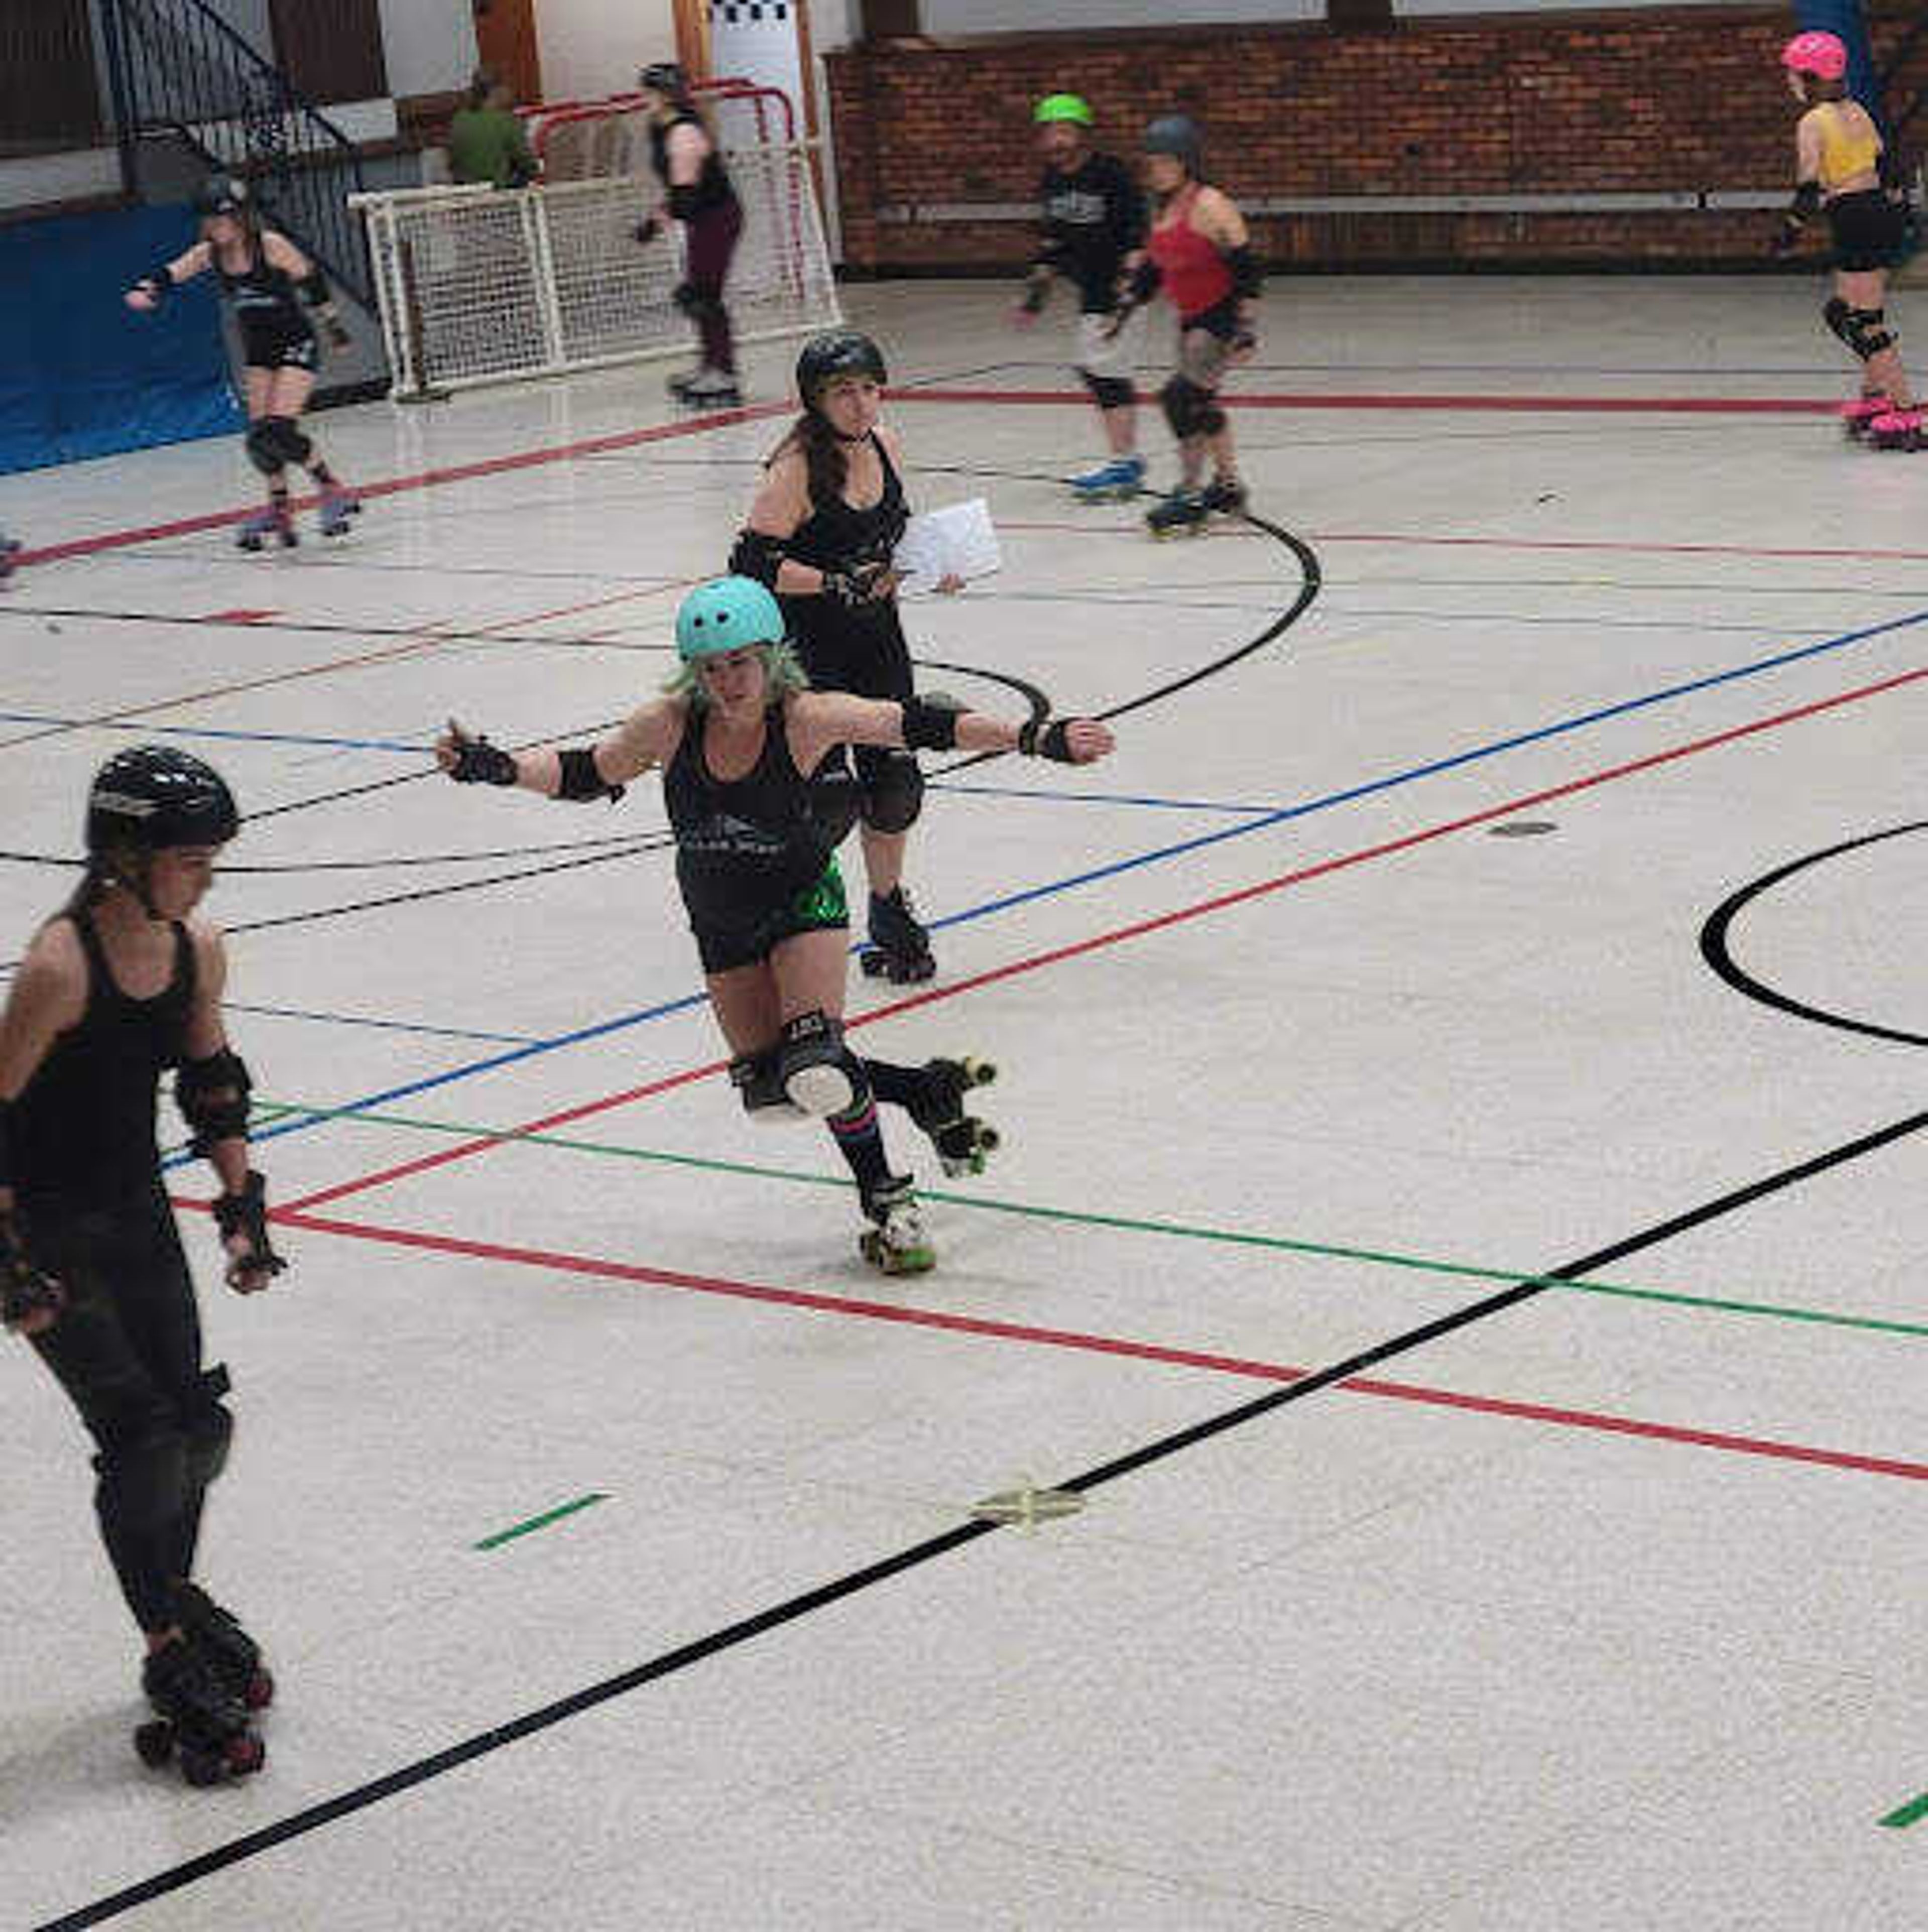 Roller Derby member “Deathstrike” warms up. She is one of the more experienced skaters on the team. 
